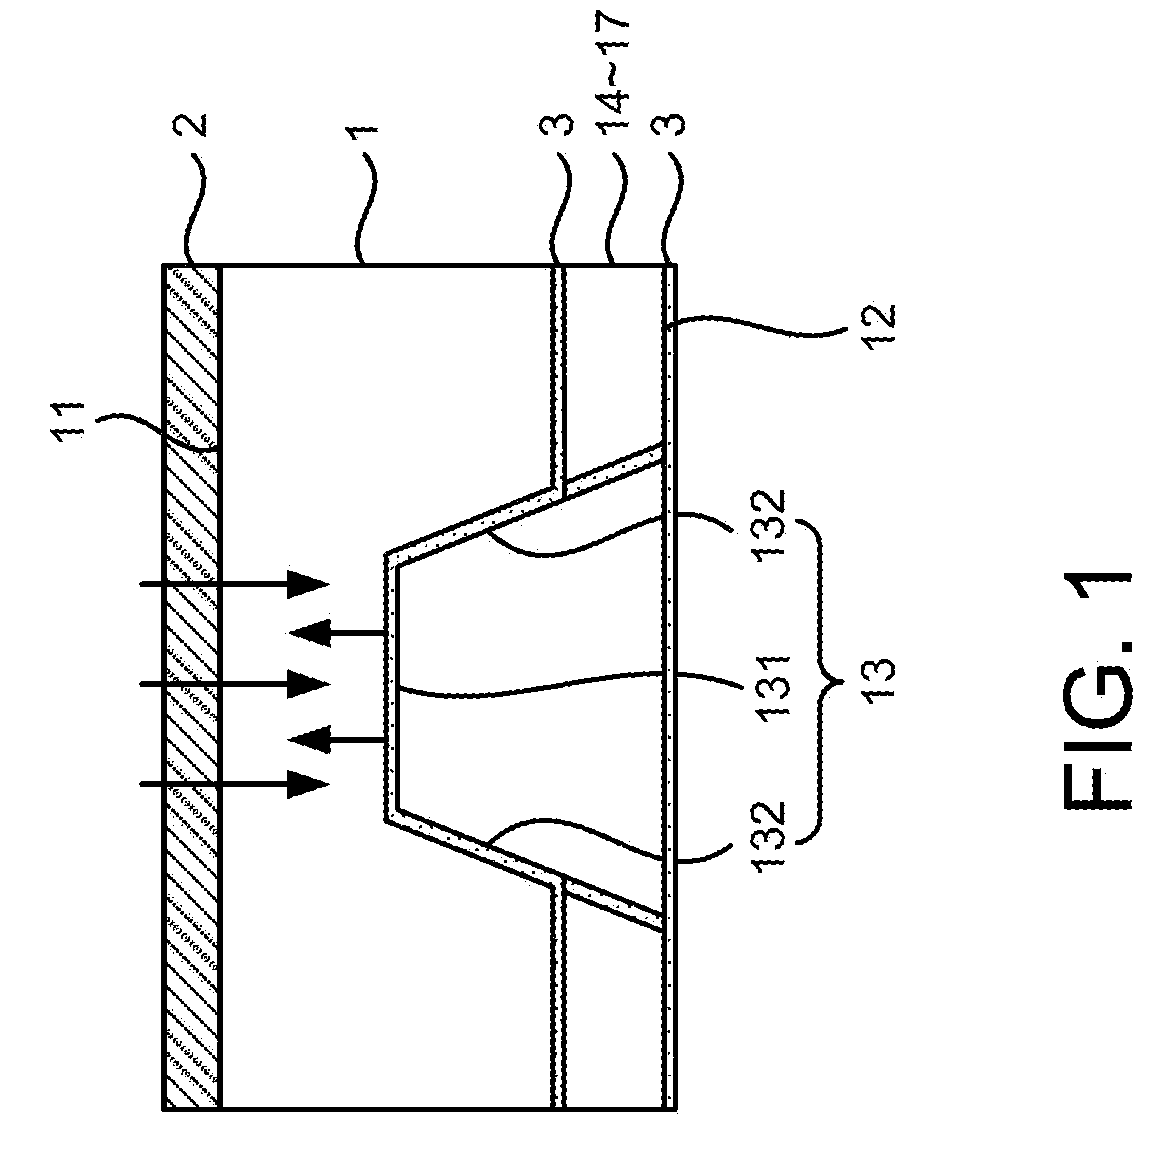 Solar Cell Device Having Low Electrical and Thermal Impedance